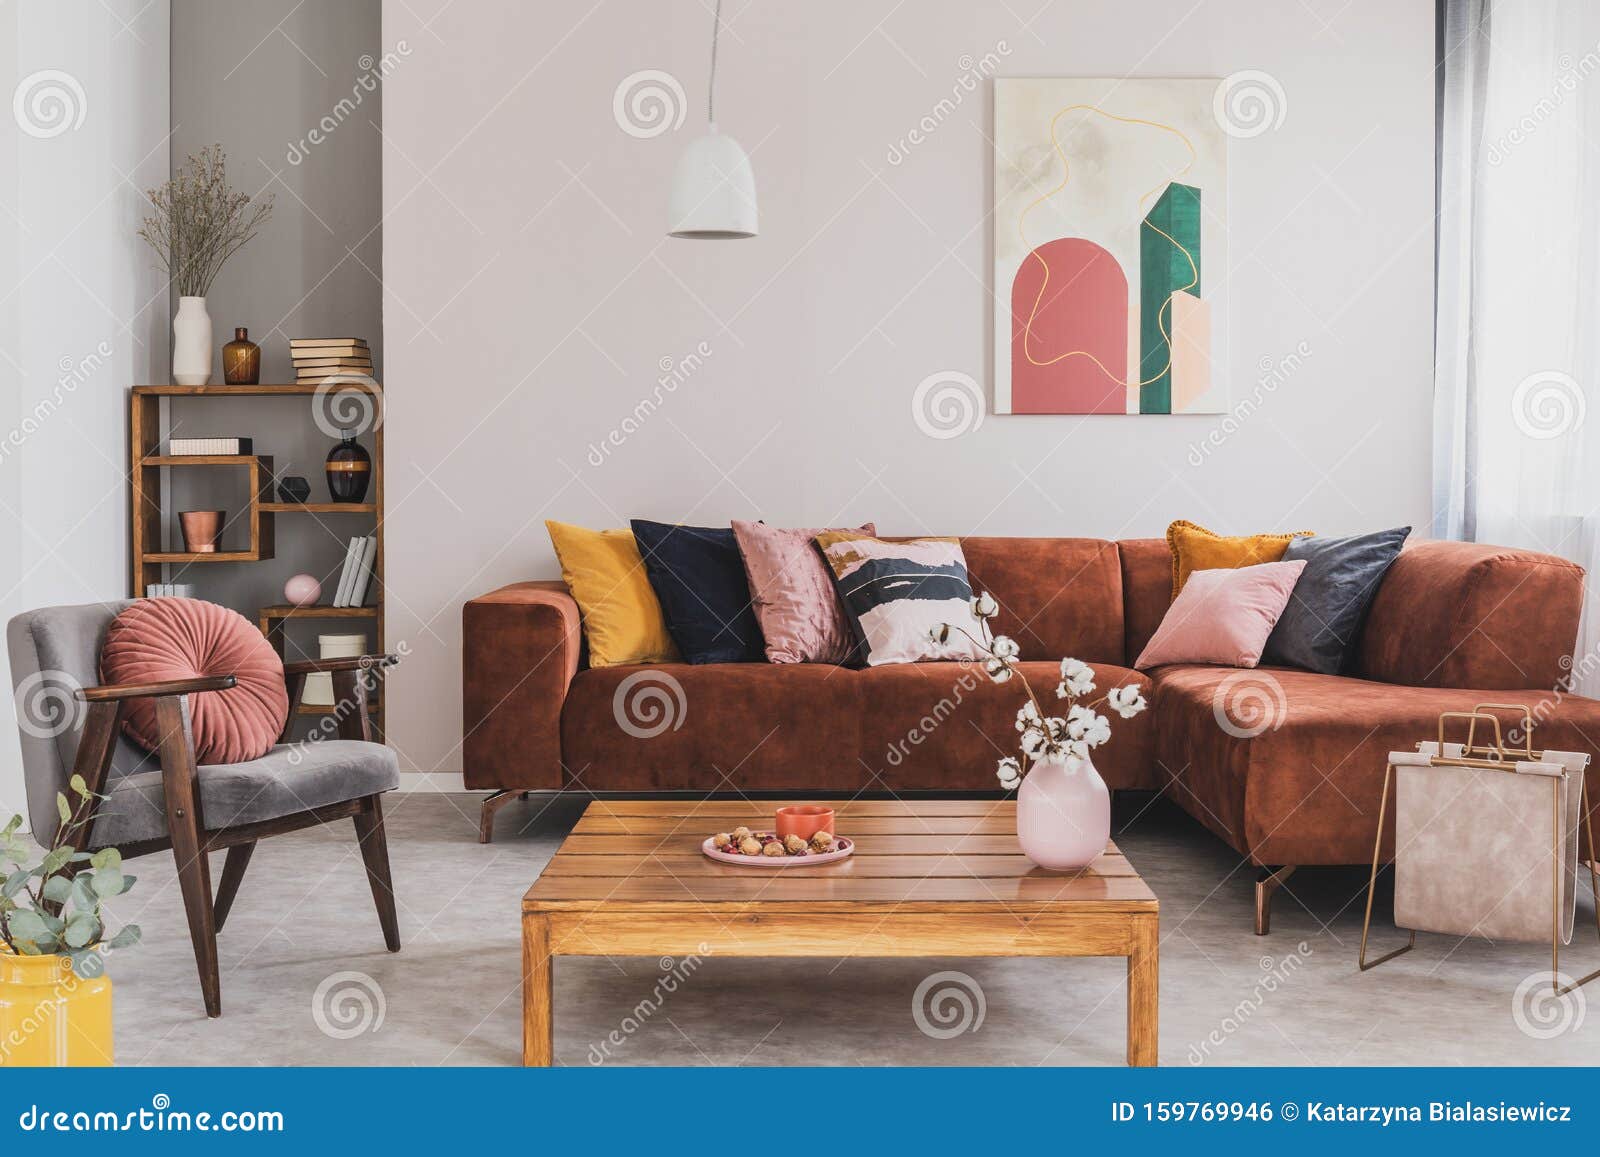 flowers in vase on wooden coffee table in fashionable living room interior with brown corner sofa with pillows and abstract